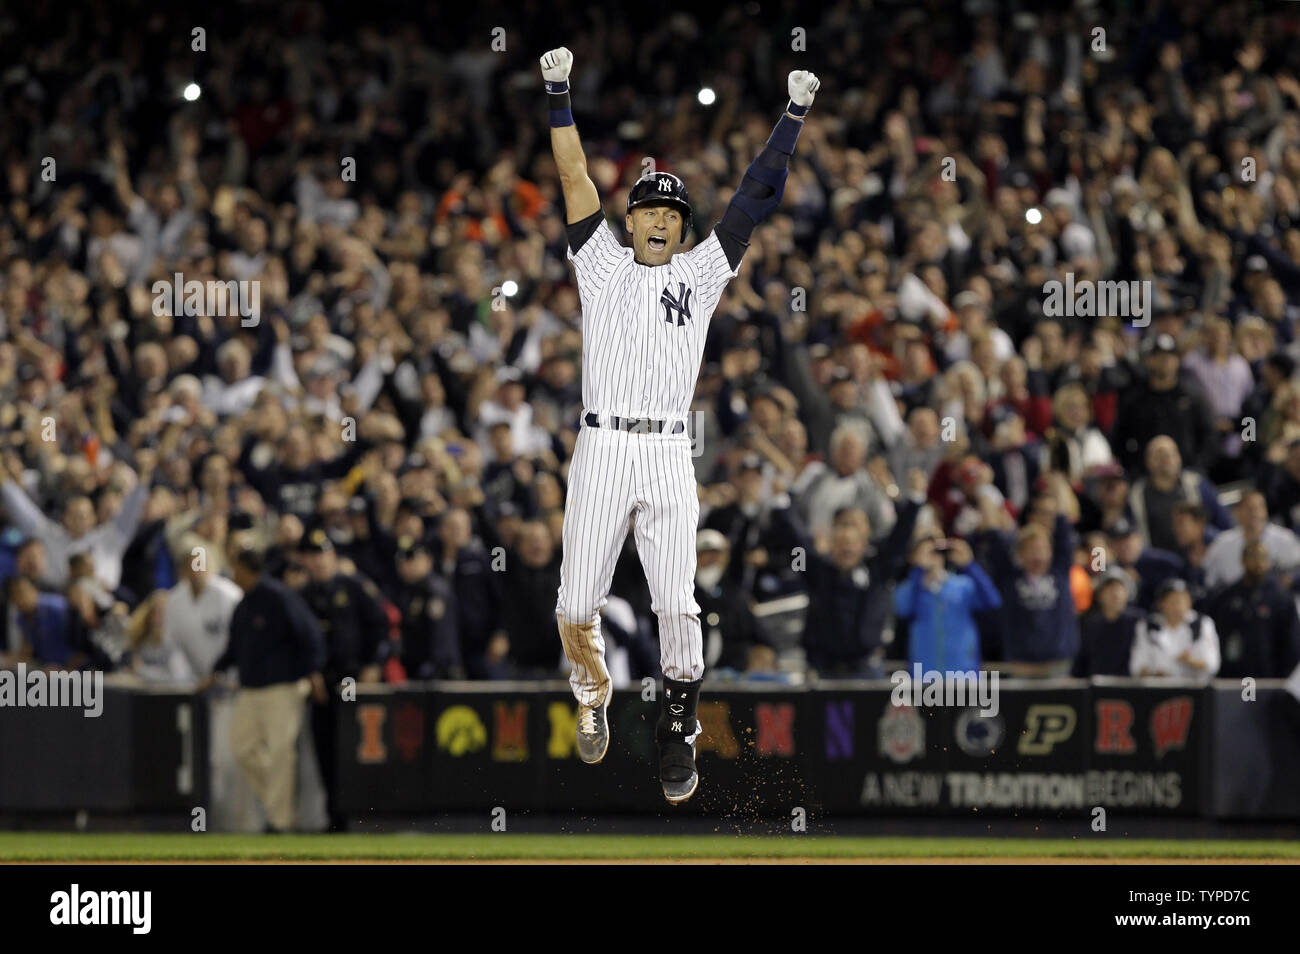 New York Yankees Derek Jeter leaps and celebrates after hitting a walk off game winning single in the bottom of the 9th inning against the Baltimore Orioles in Derek Jeter's final game ever at at Yankee Stadium in New York City on September 25, 2014. The Yankees defeated the Orioles6-5. Derek Jeter will end his MLB Hall Of Fame career with a 3-game series in Boston against the Red Sox this weekend.       UPI/John Angelillo Stock Photo